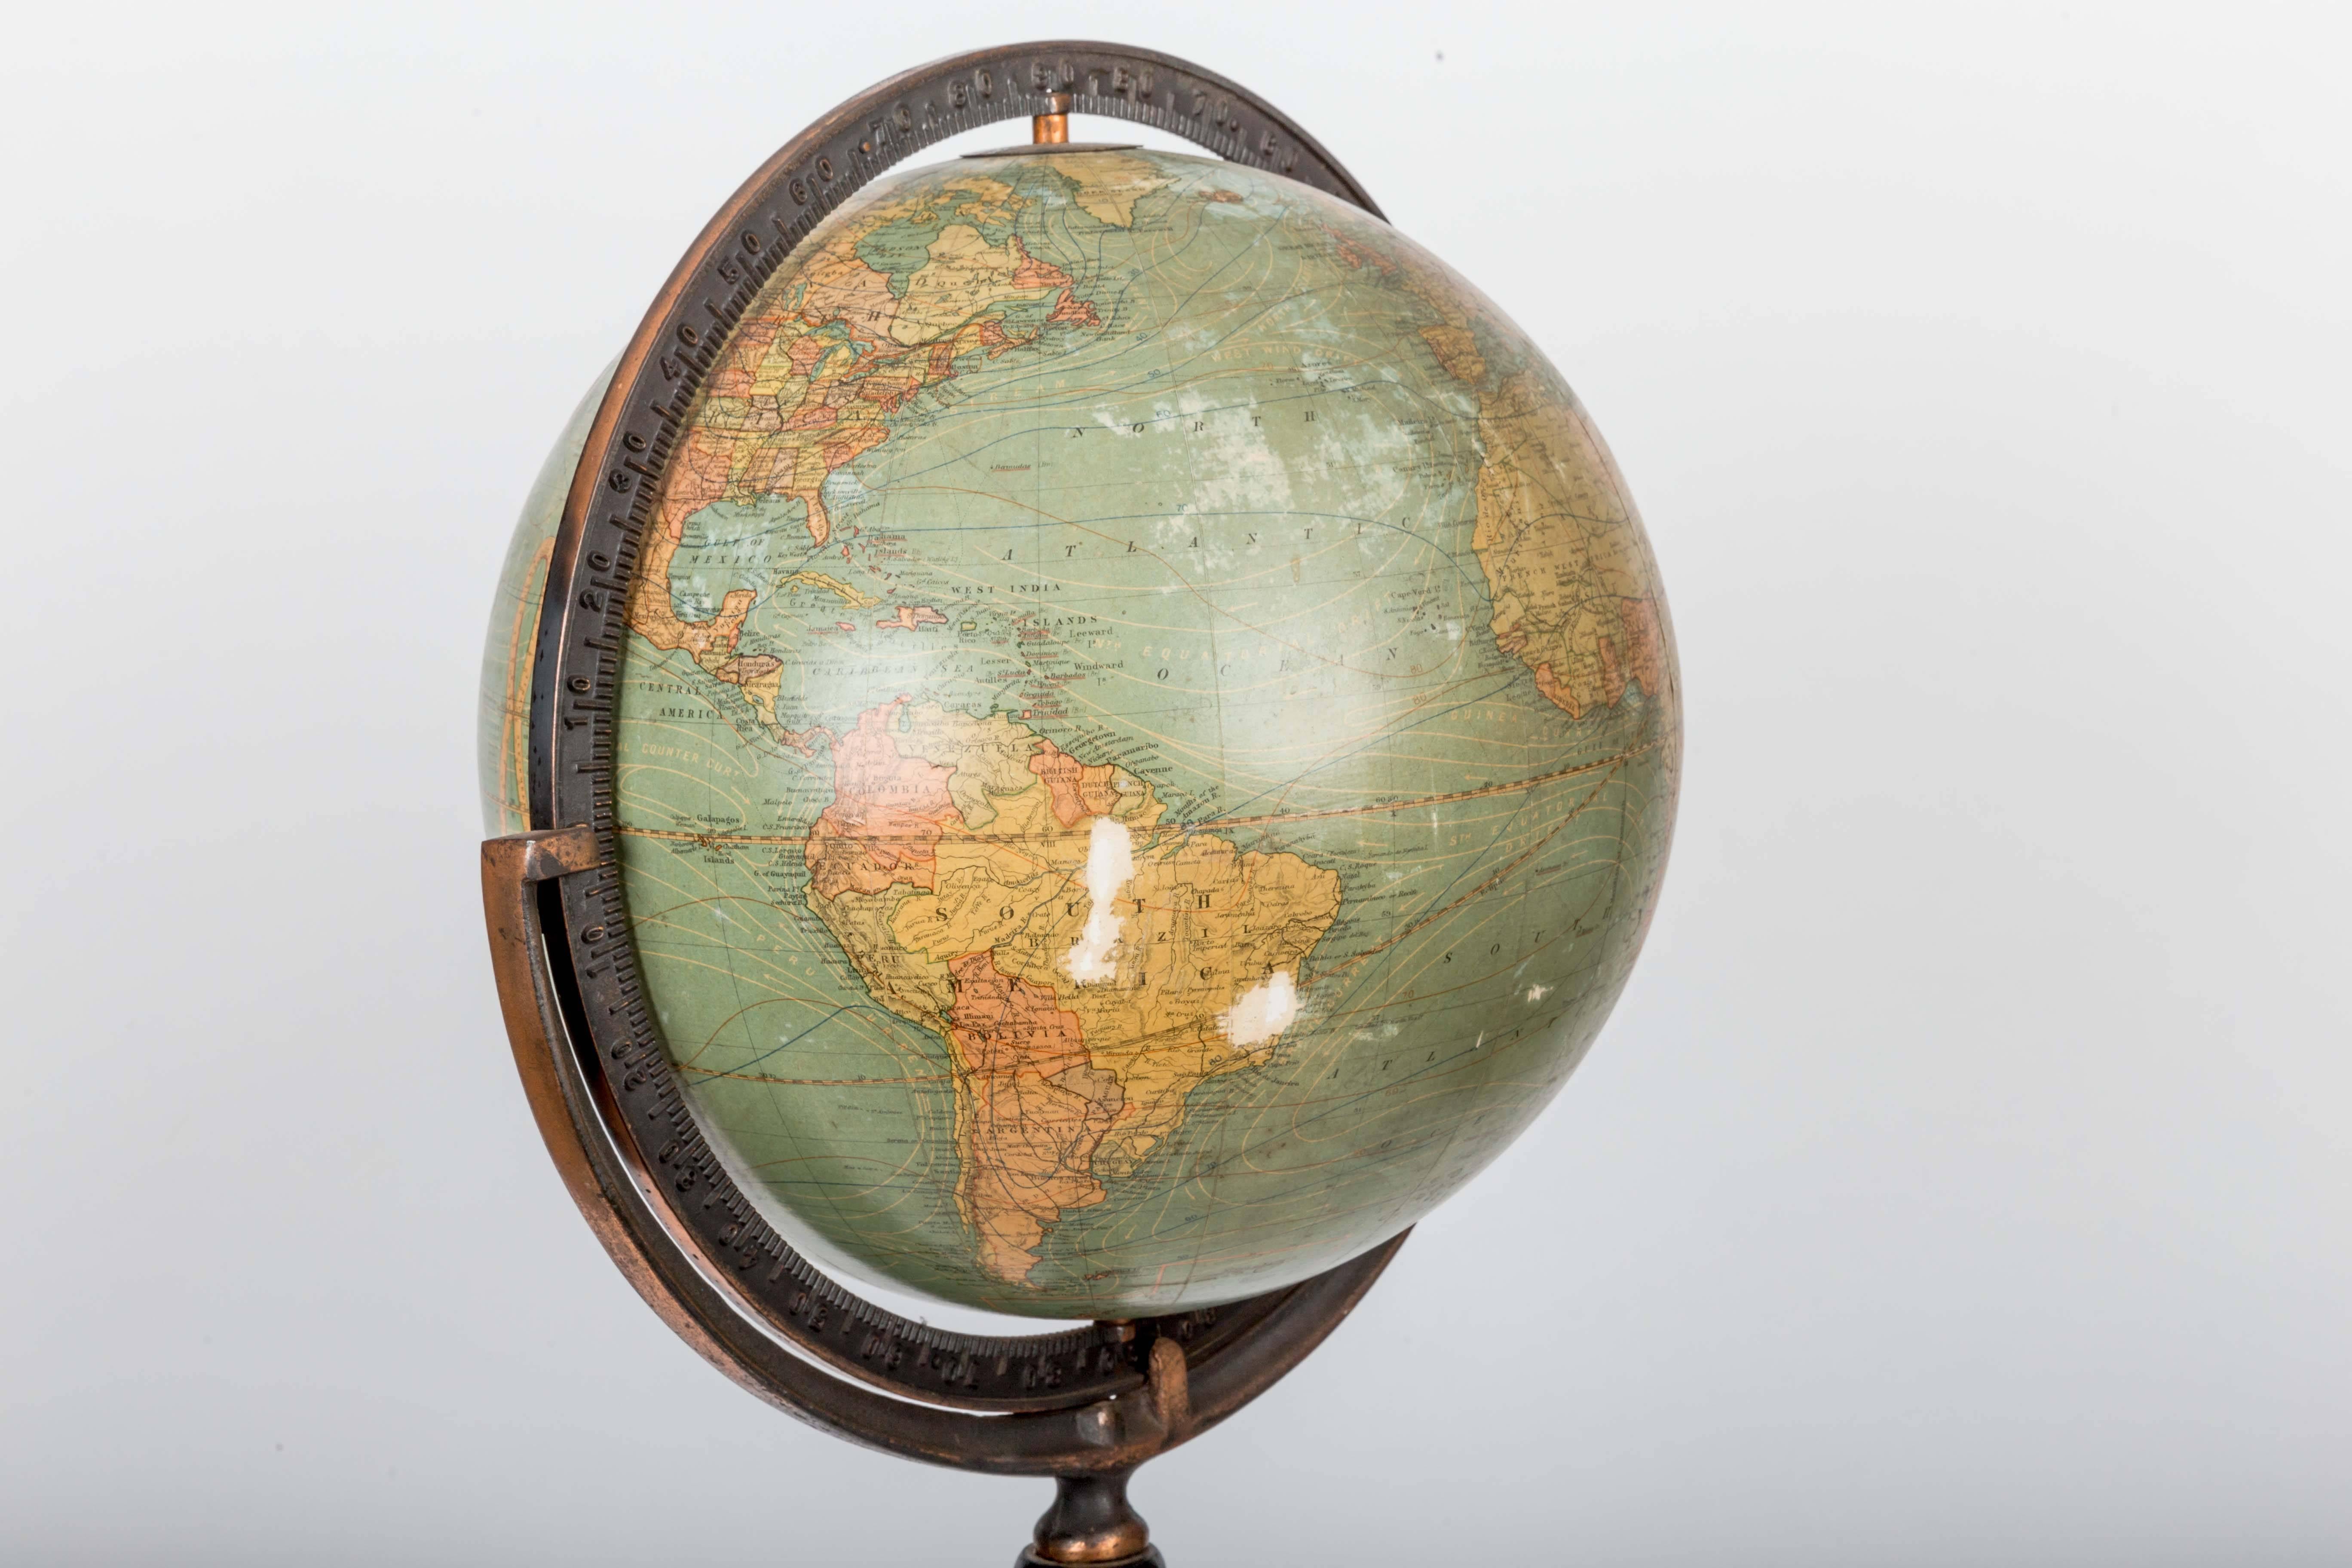 Early 20th century 12-inch terrestrial globe on turned walnut stand made by Kittinger Company of Buffalo NY.

It has a full ring meridian which is cradled in the stand, allowing the orb to slide/rotate, changing the axis angle. The meridian and